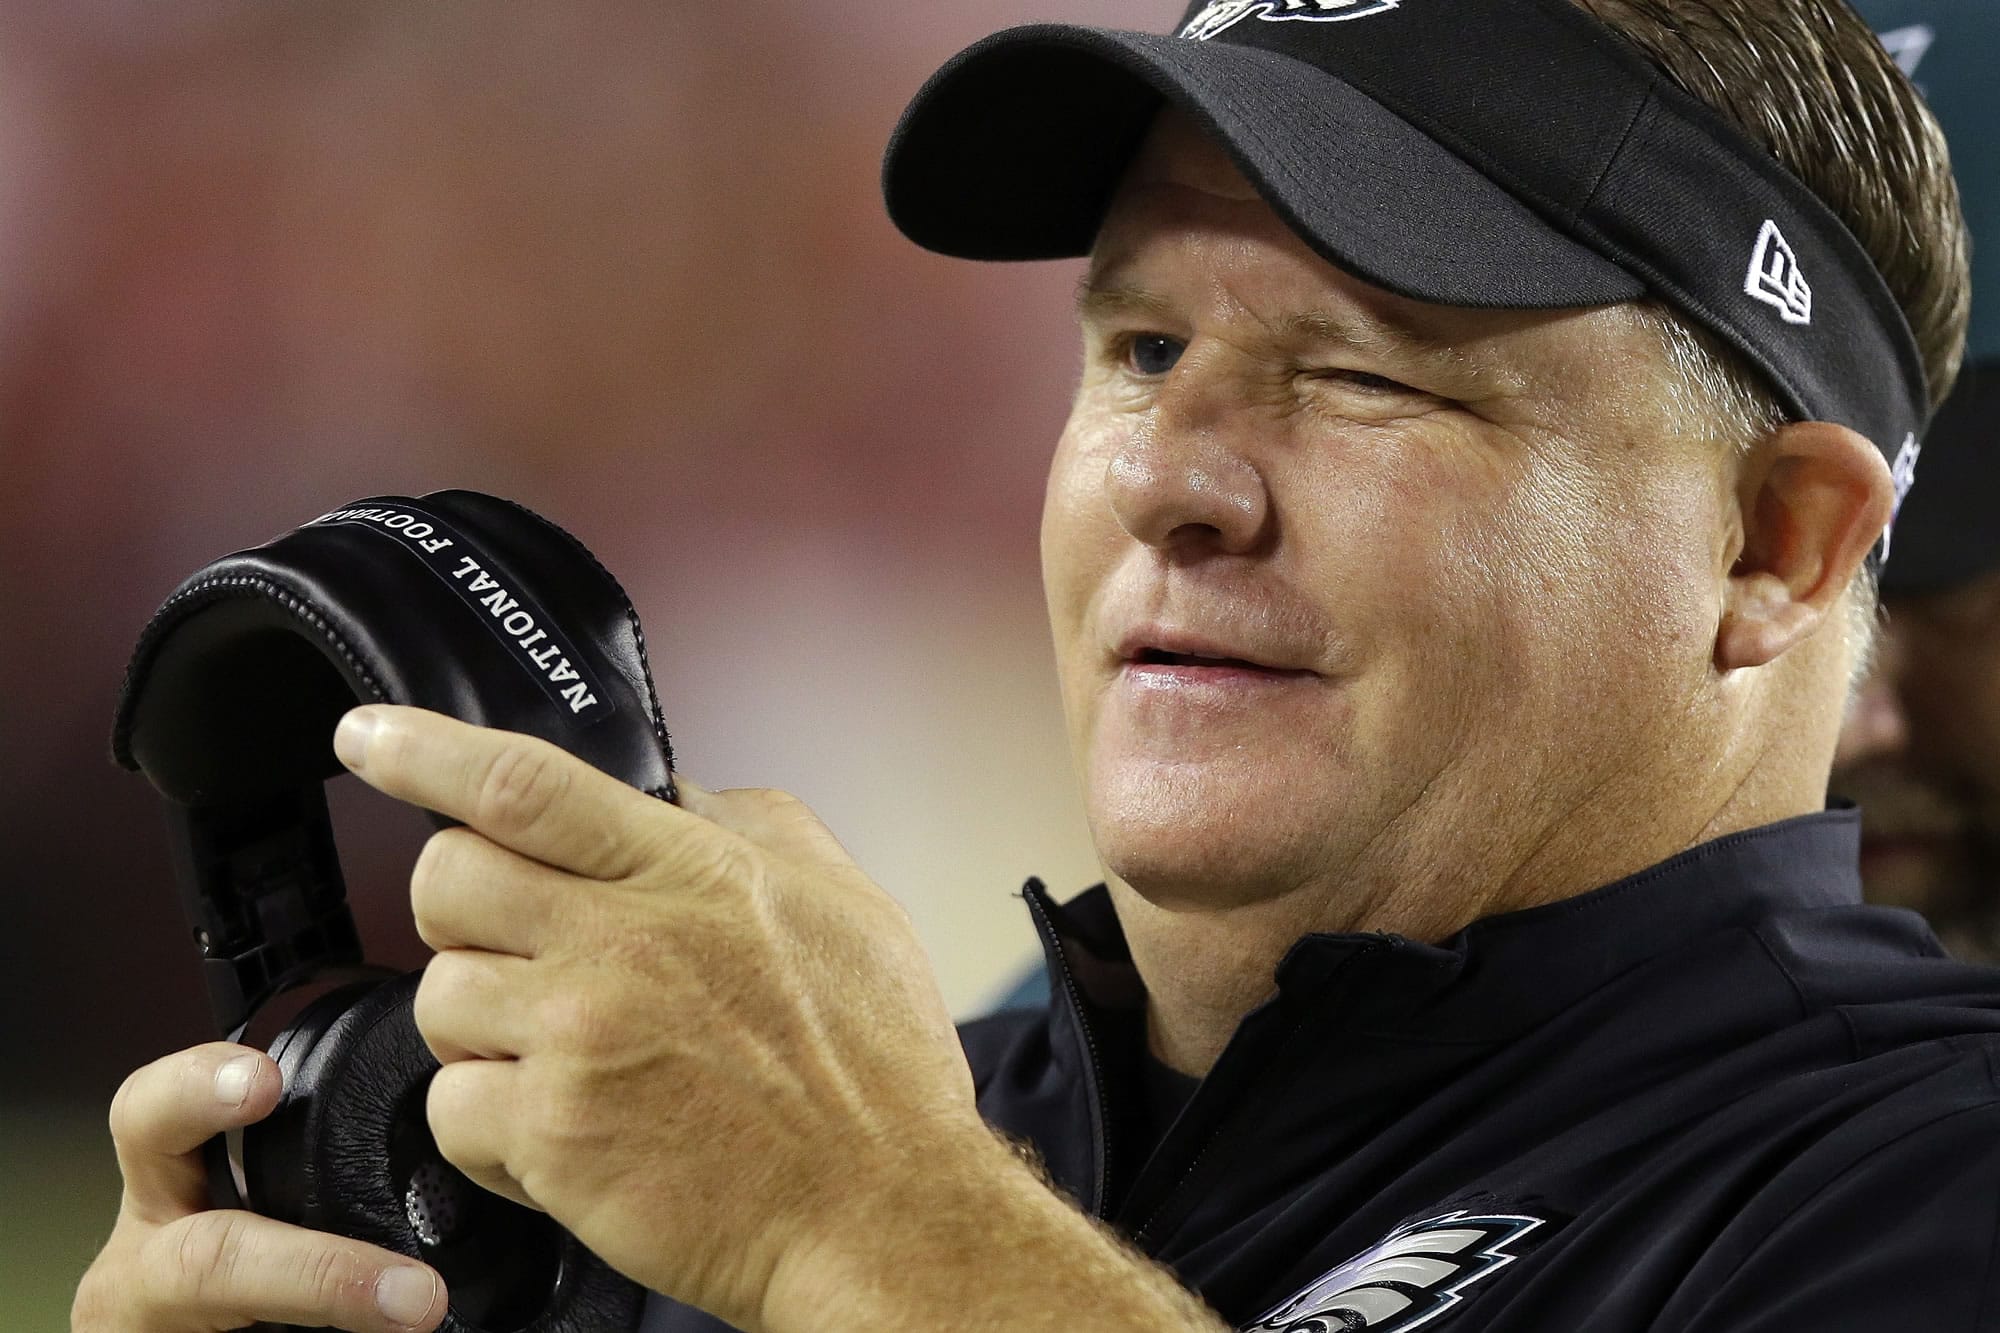 Philadelphia Eagles head coach Chip Kelly winks as he watchers the action on the field during the second half of an NFL football game against the Washington Redskins in Landover, Md., Monday, Sept. 9, 2013.